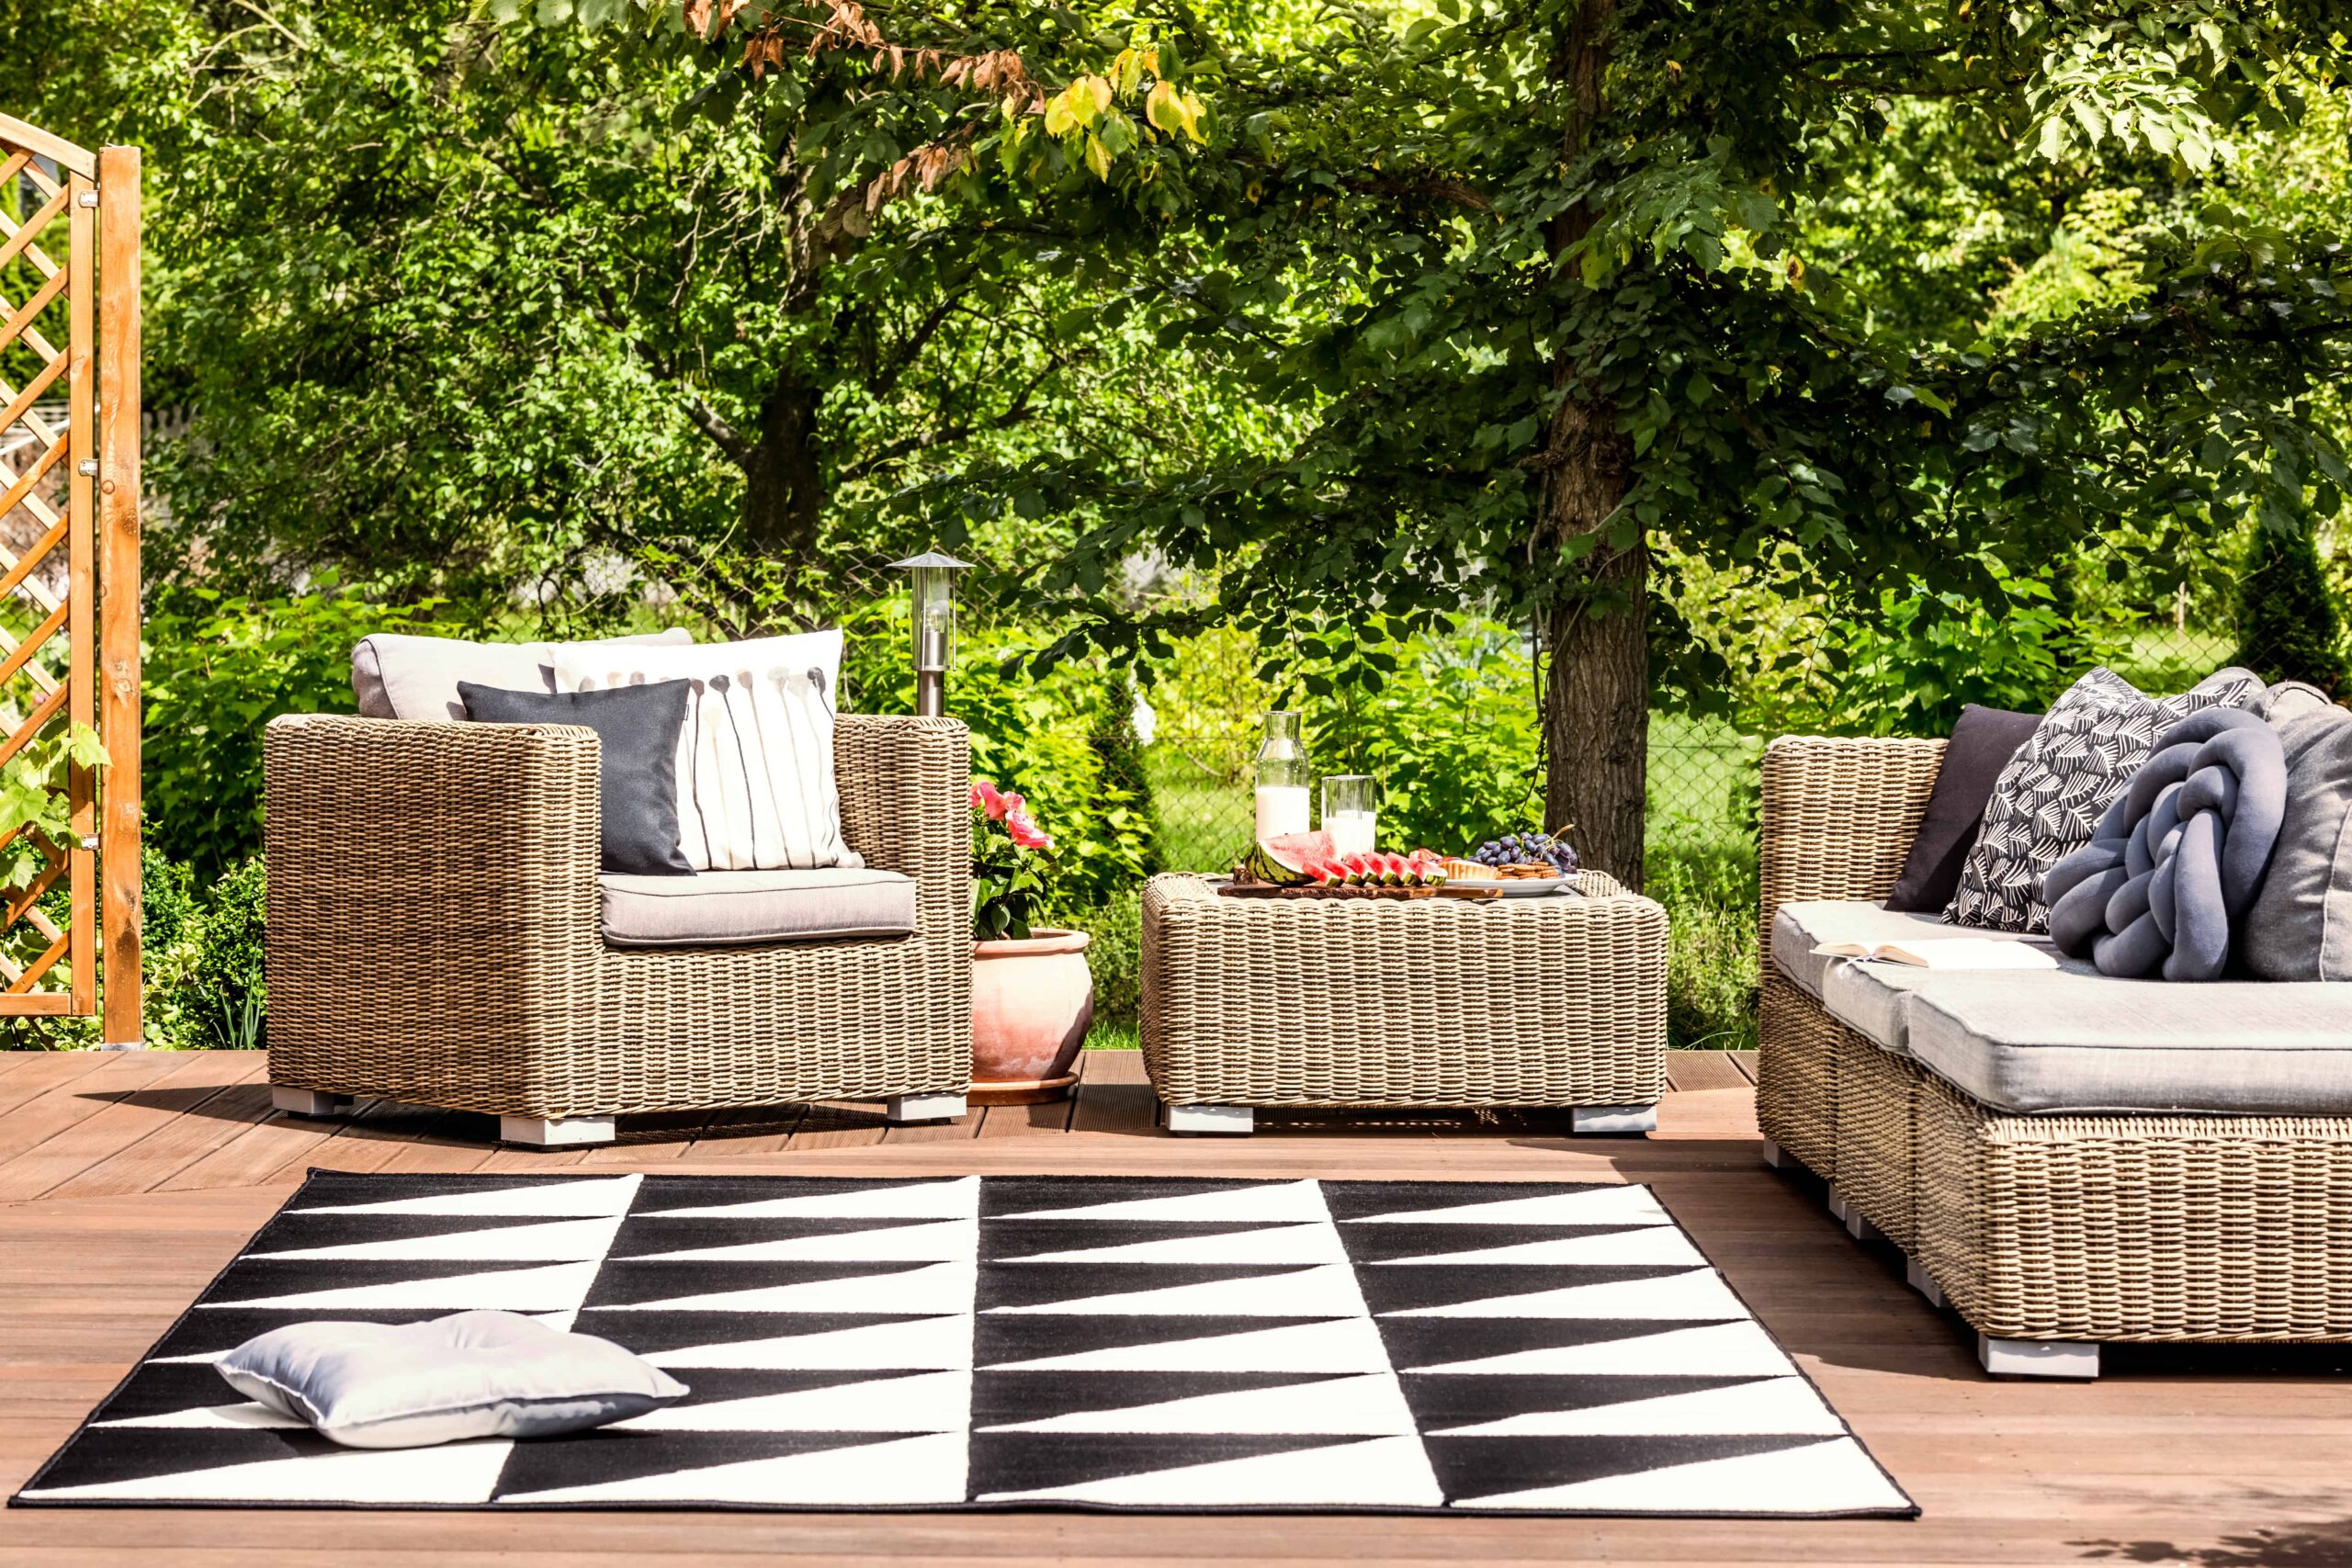 Will an Outdoor Rug Damage a Wood Deck? Protect Yours!